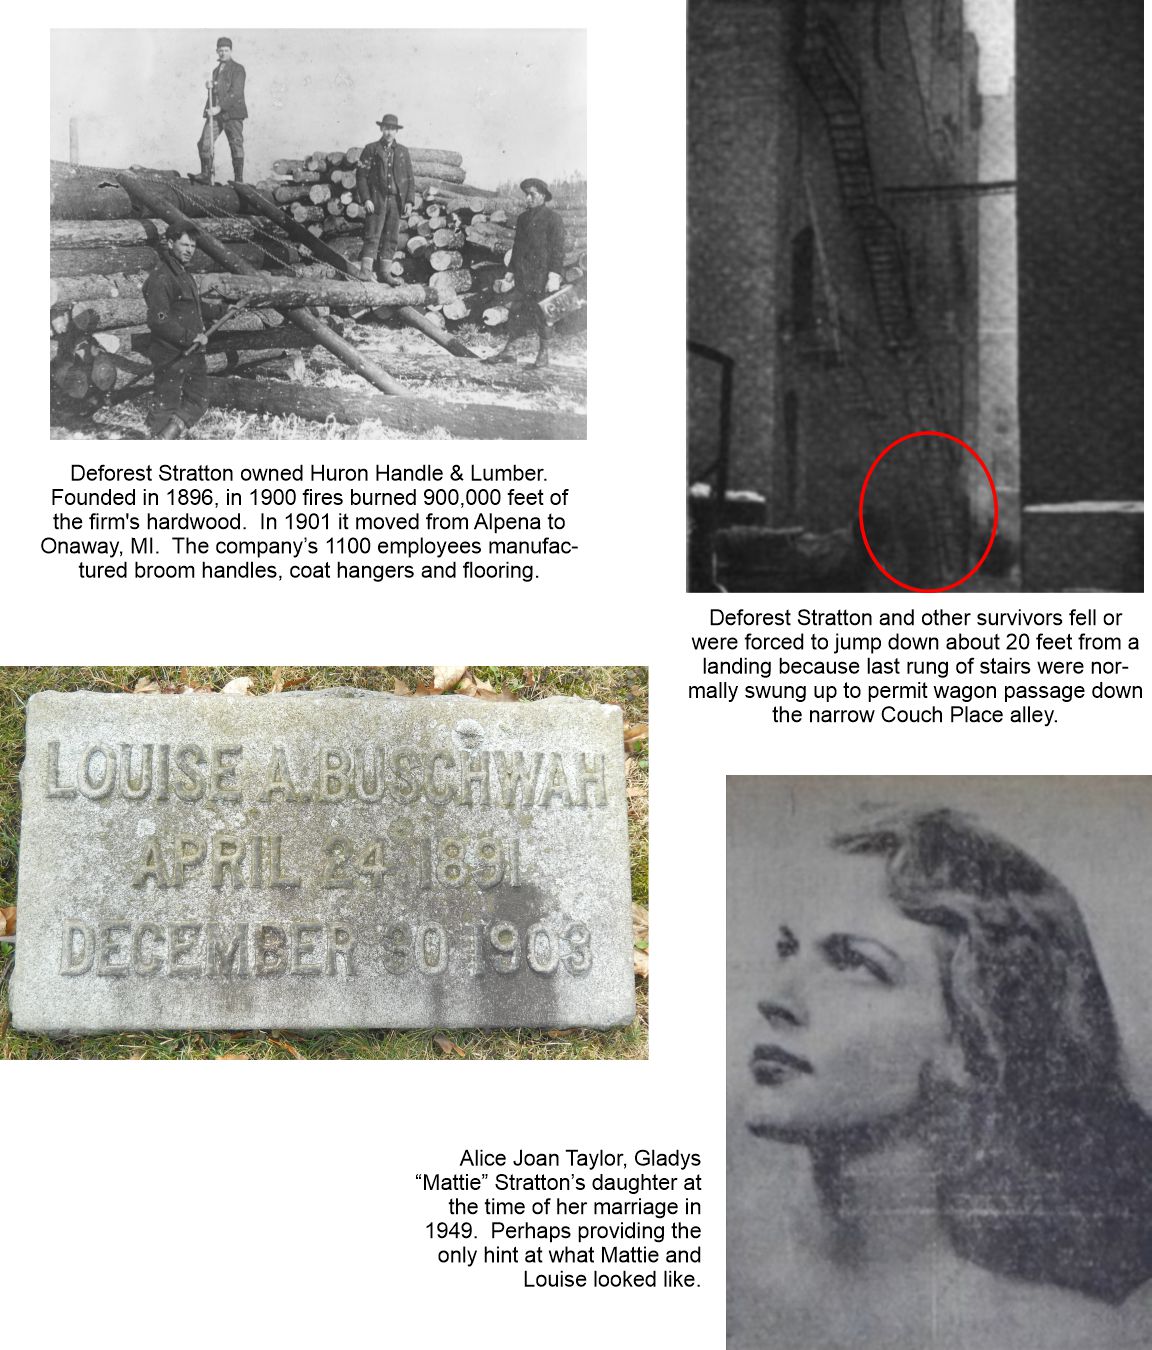 Twelve year old Louise Buschwah lost her life at the Iroquois Theater